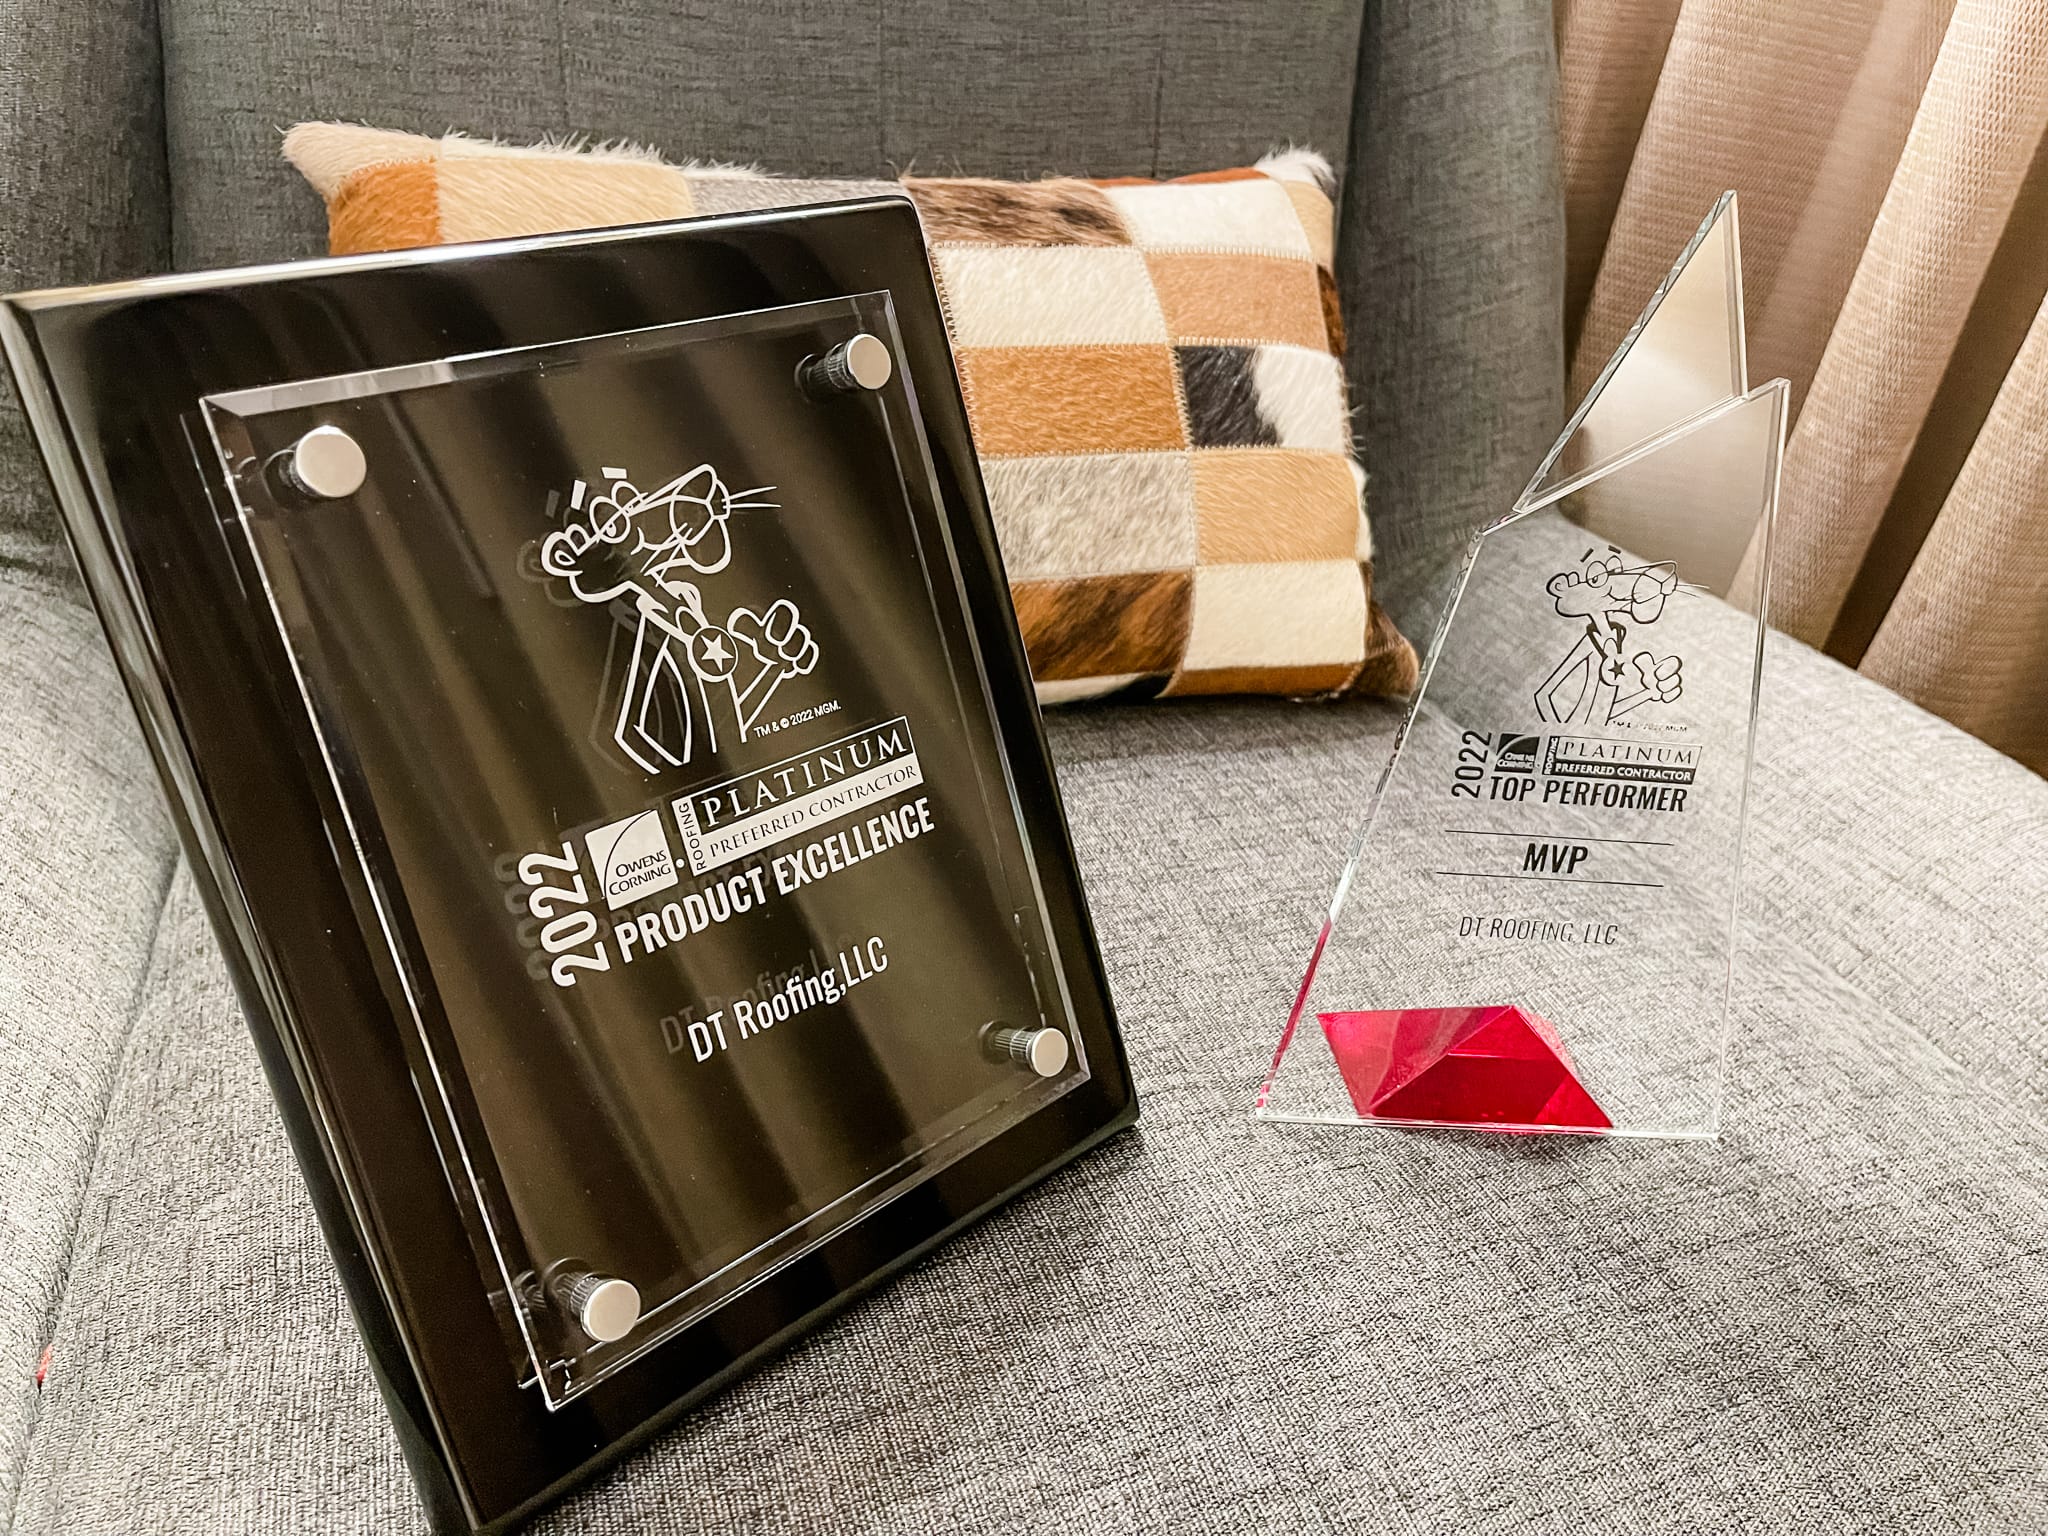 Award-Winning Owens Corning Platinum Preferred Contractor - Product Excellence